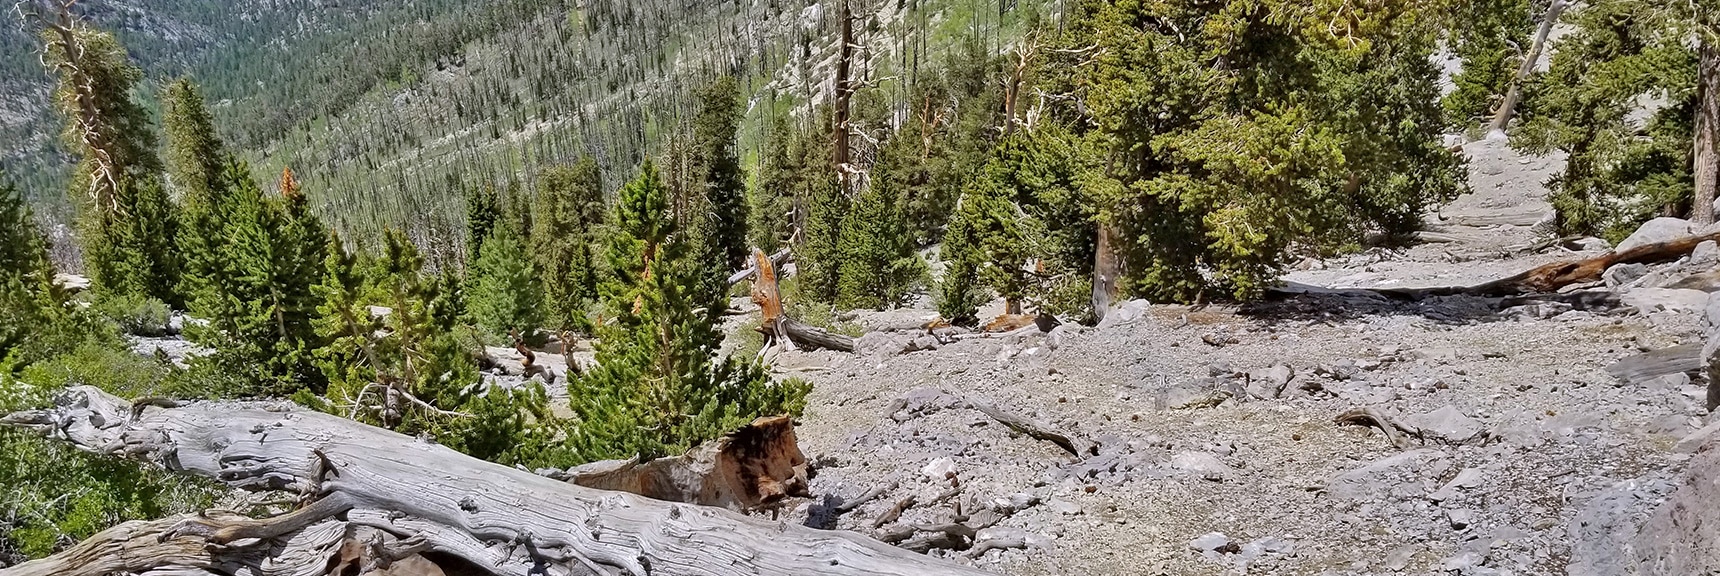 View Down the "Horrifying Half-Mile" Avalanche Slope from its Summit. | Mummy Mountain NW Cliffs | Mt Charleston Wilderness | Spring Mountains, Nevada